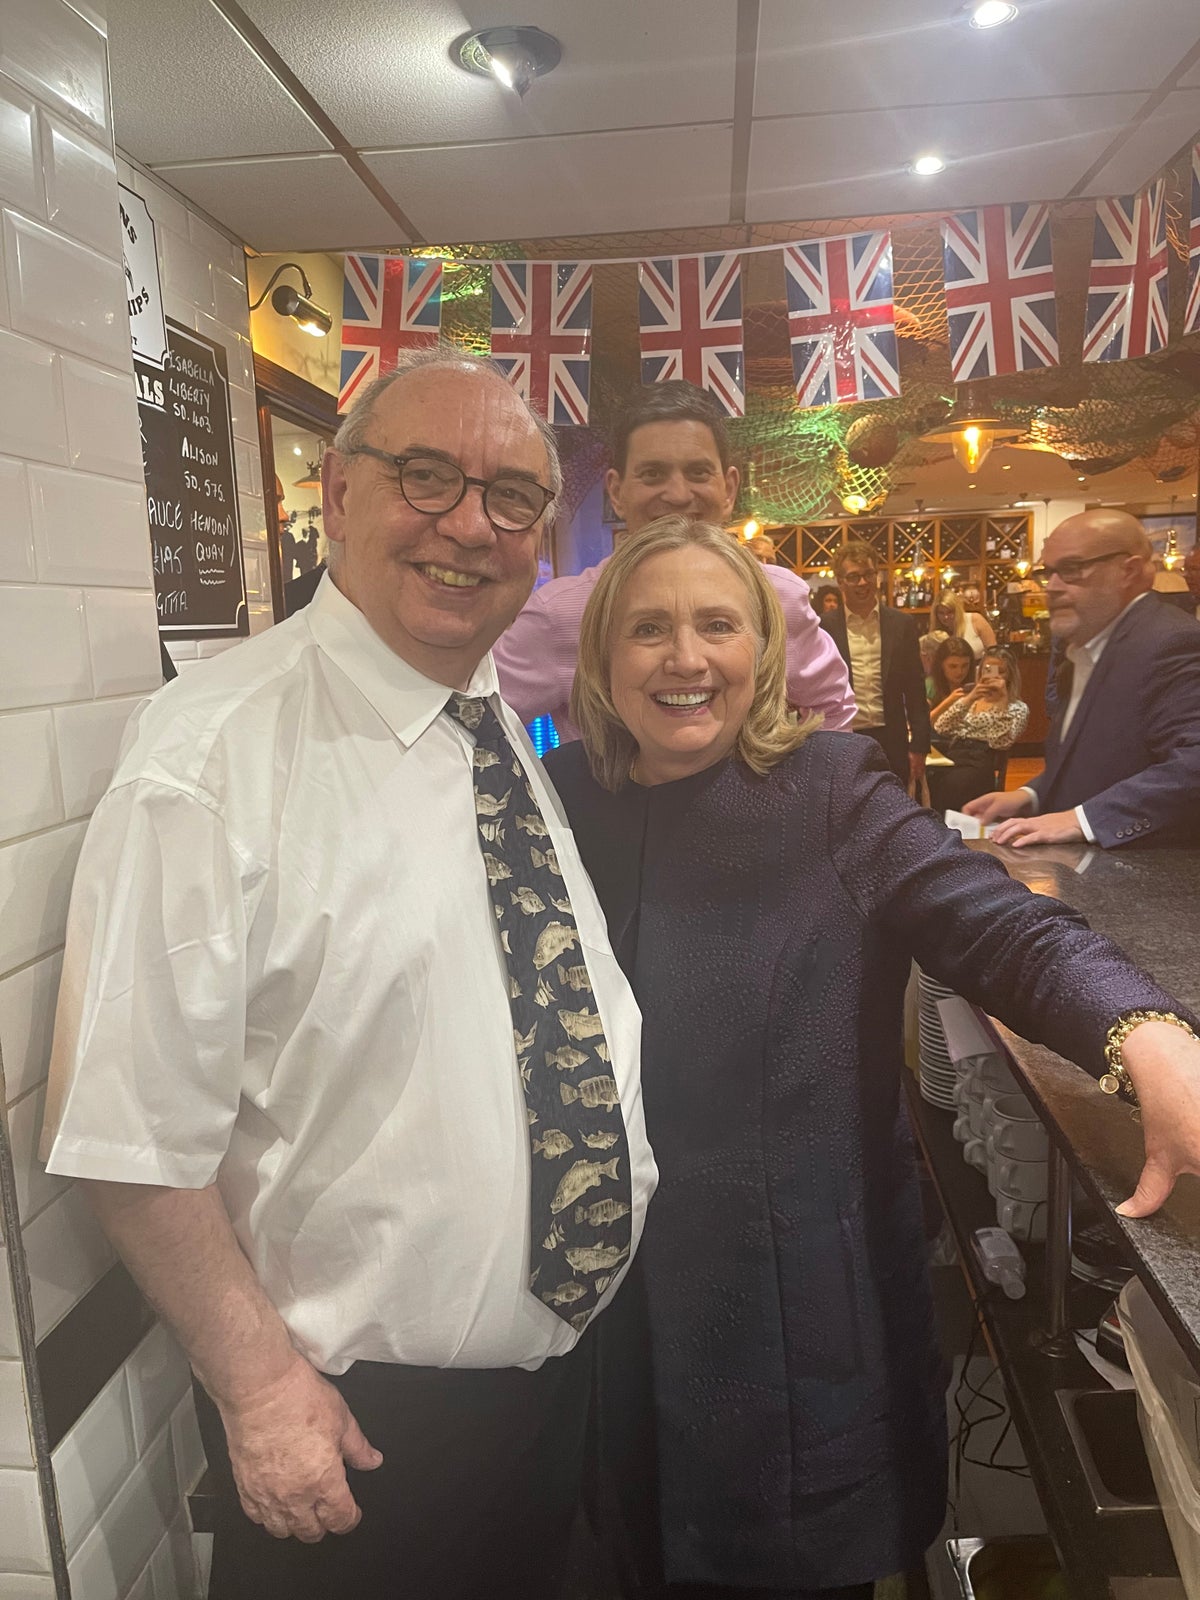 ‘Surreal’ to serve Hillary Clinton, says British chippie owner